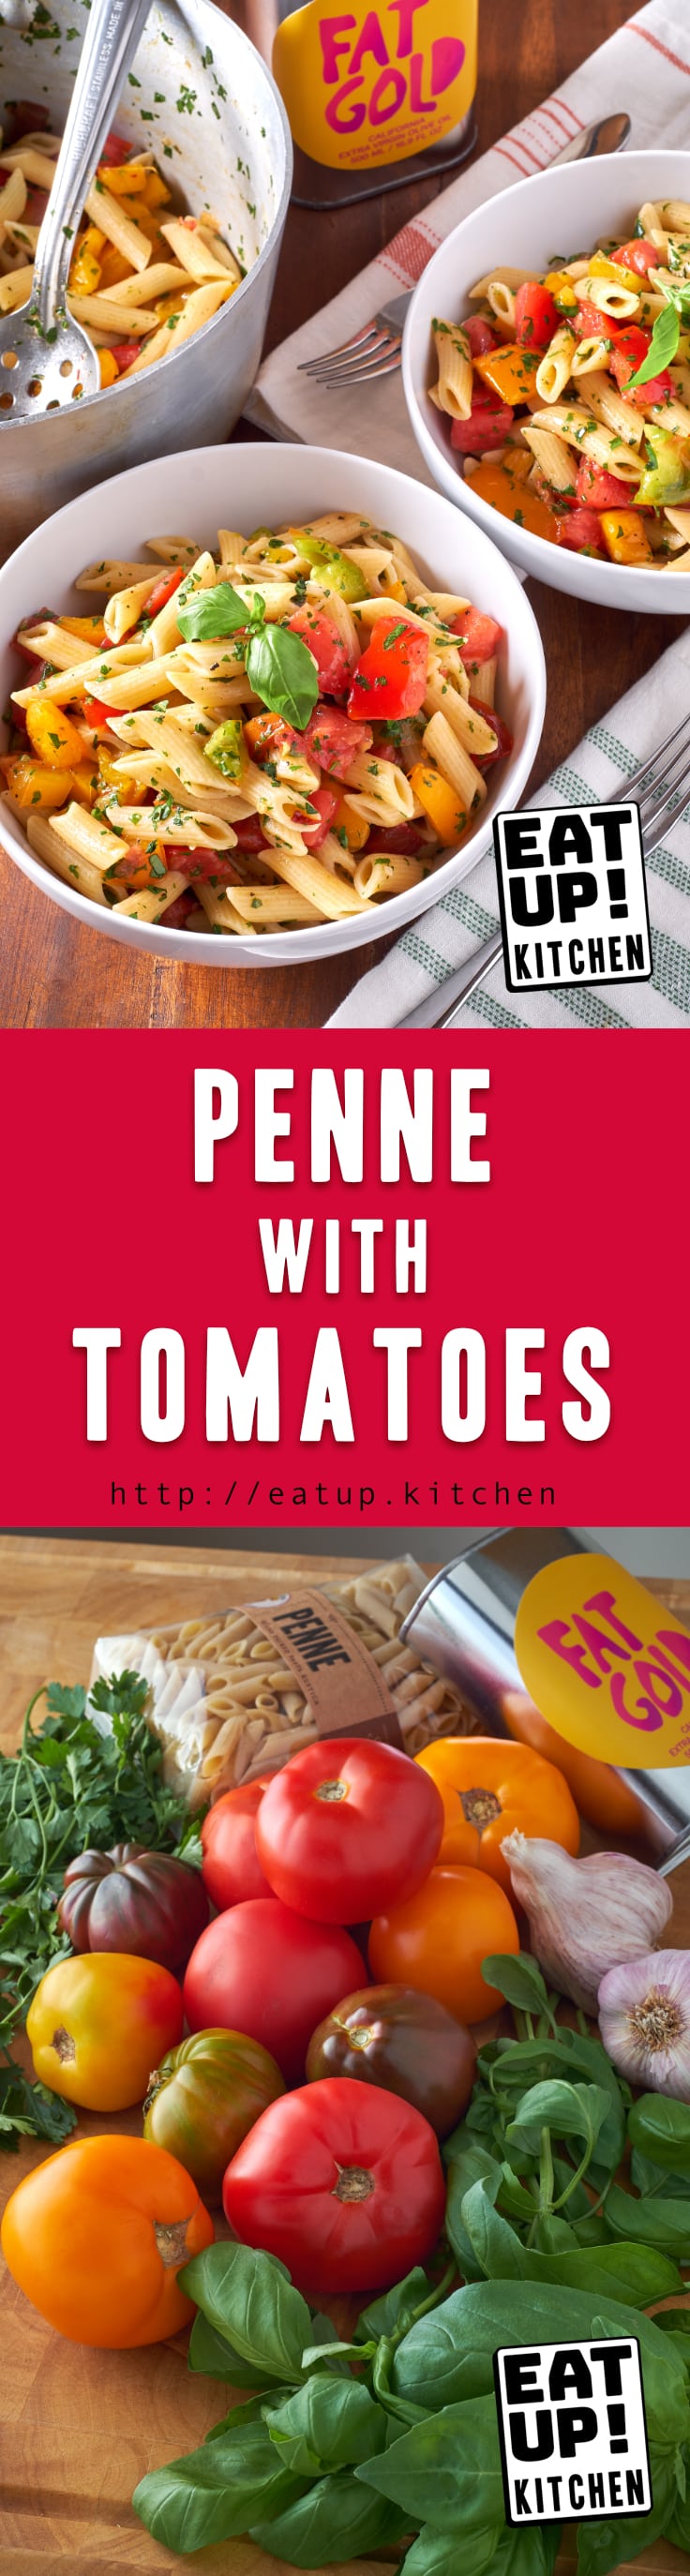 Penne with Tomatoes